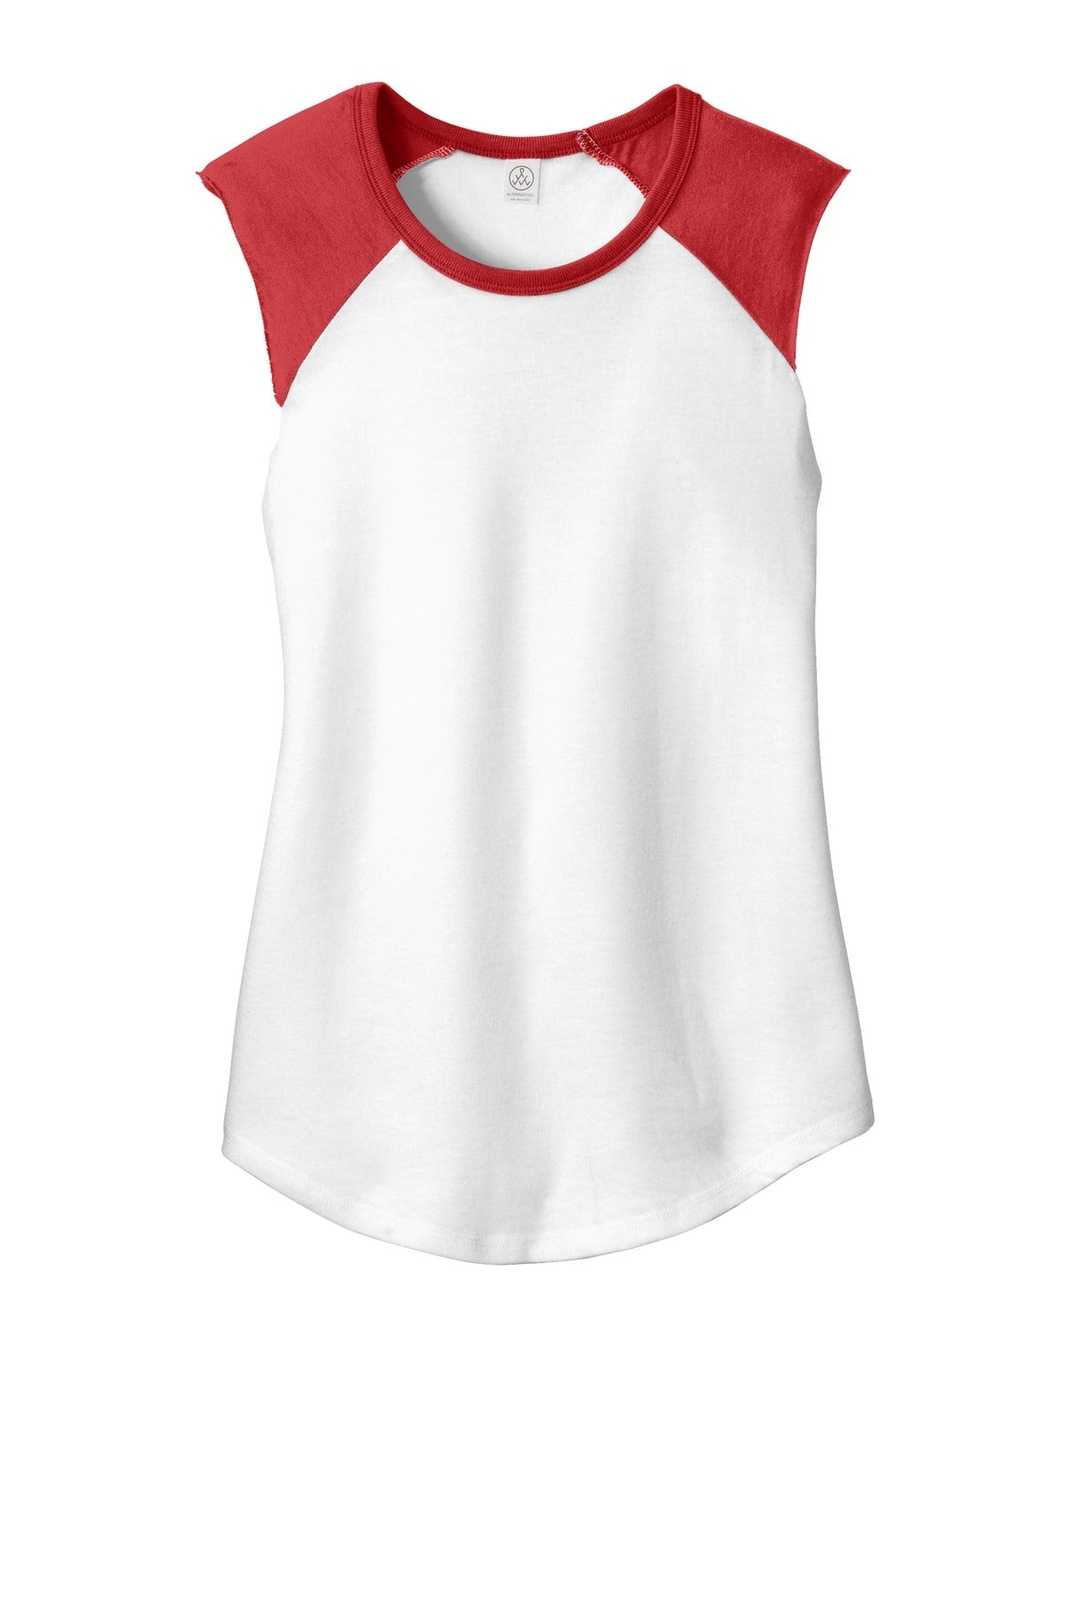 Alternative AA5104 Women's Team Player Vintage 50/50 Tee - White Red - HIT a Double - 1